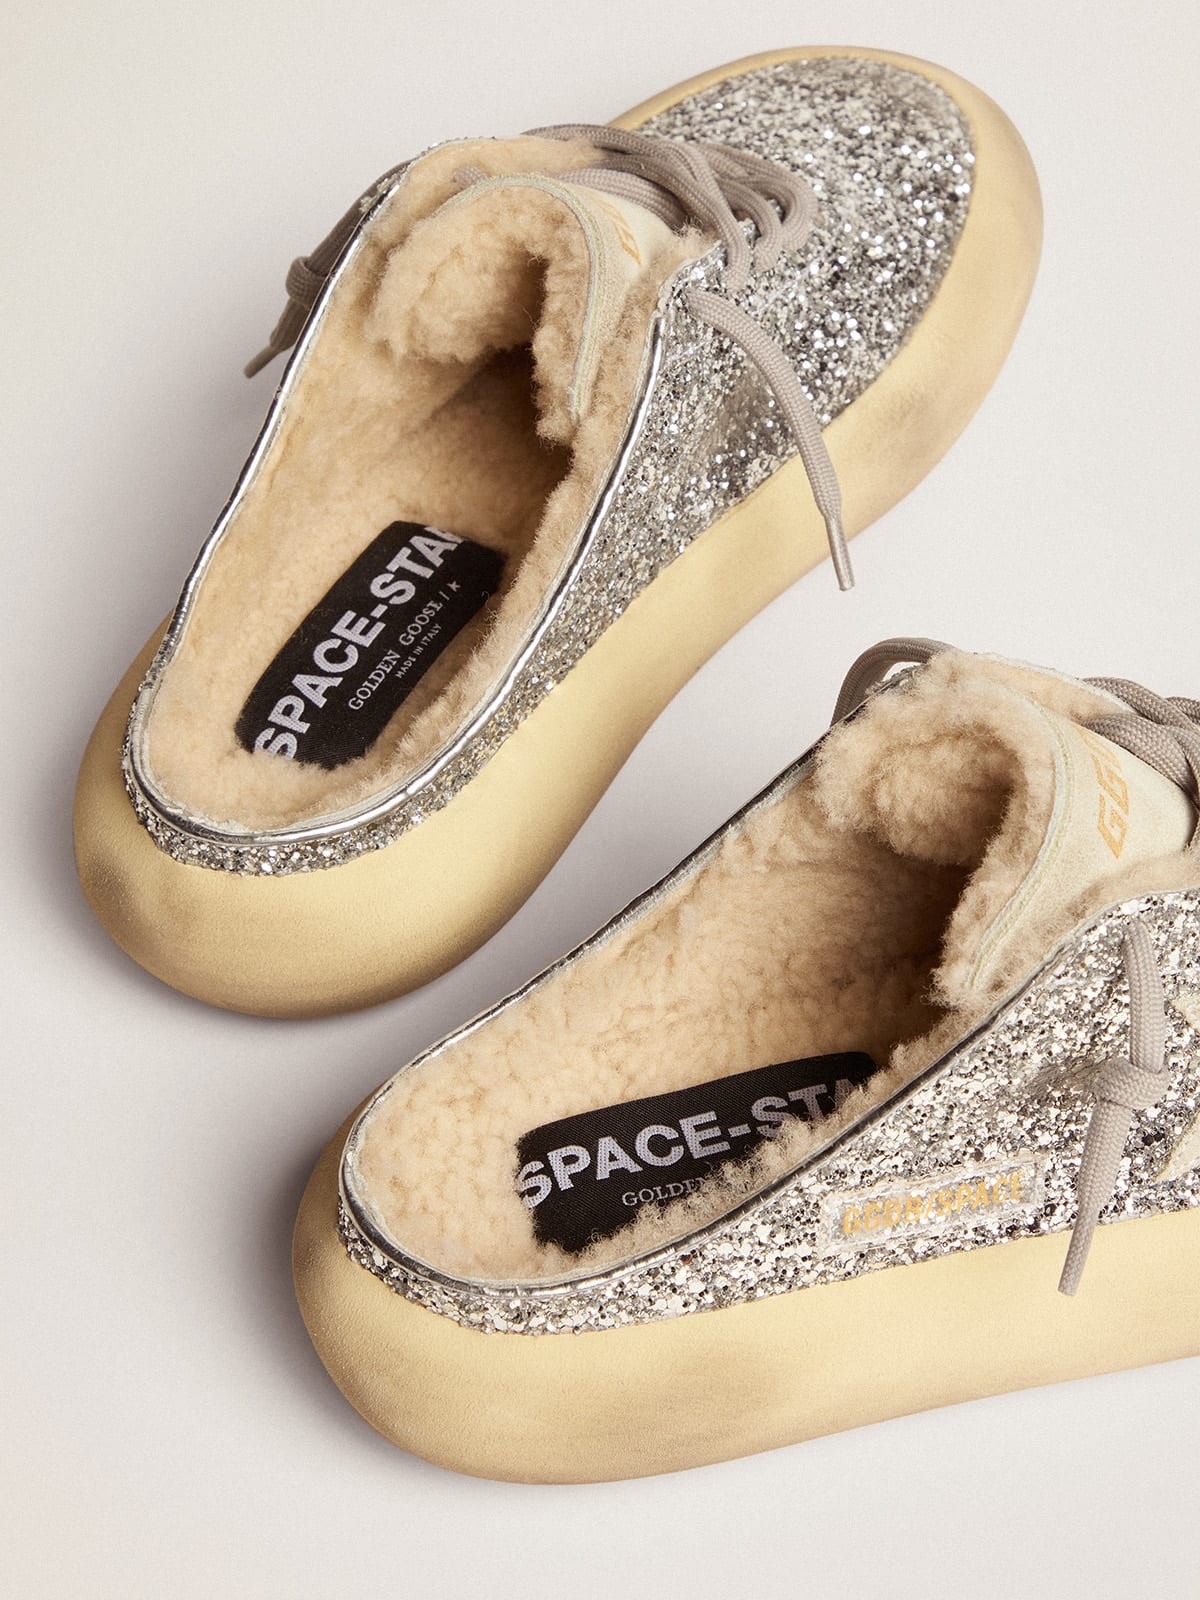 Space-Star Sabot shoes in silver glitter with shearling lining - 5